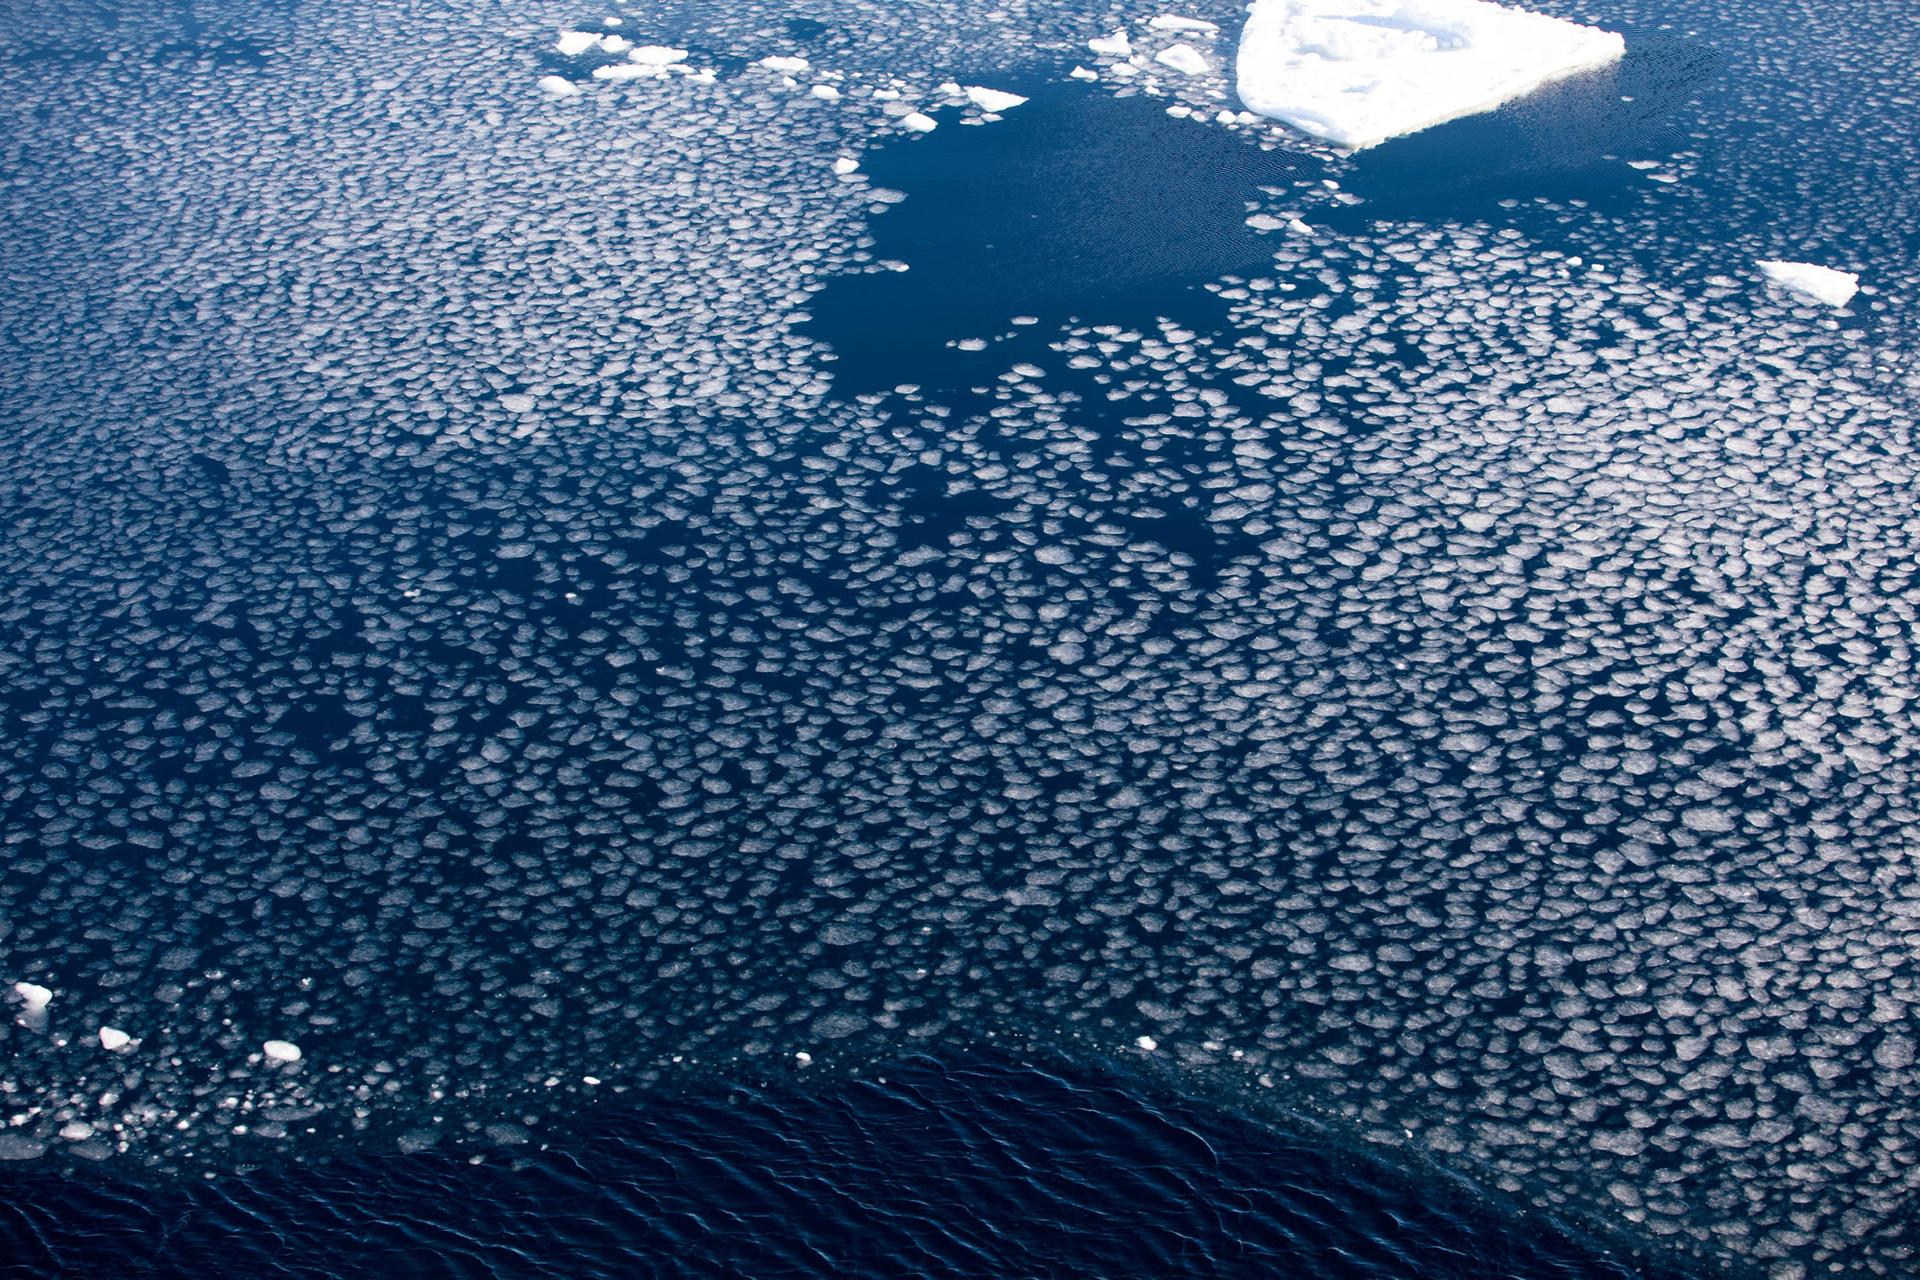 Thousands of circular white pieces of ice are show across the photo.